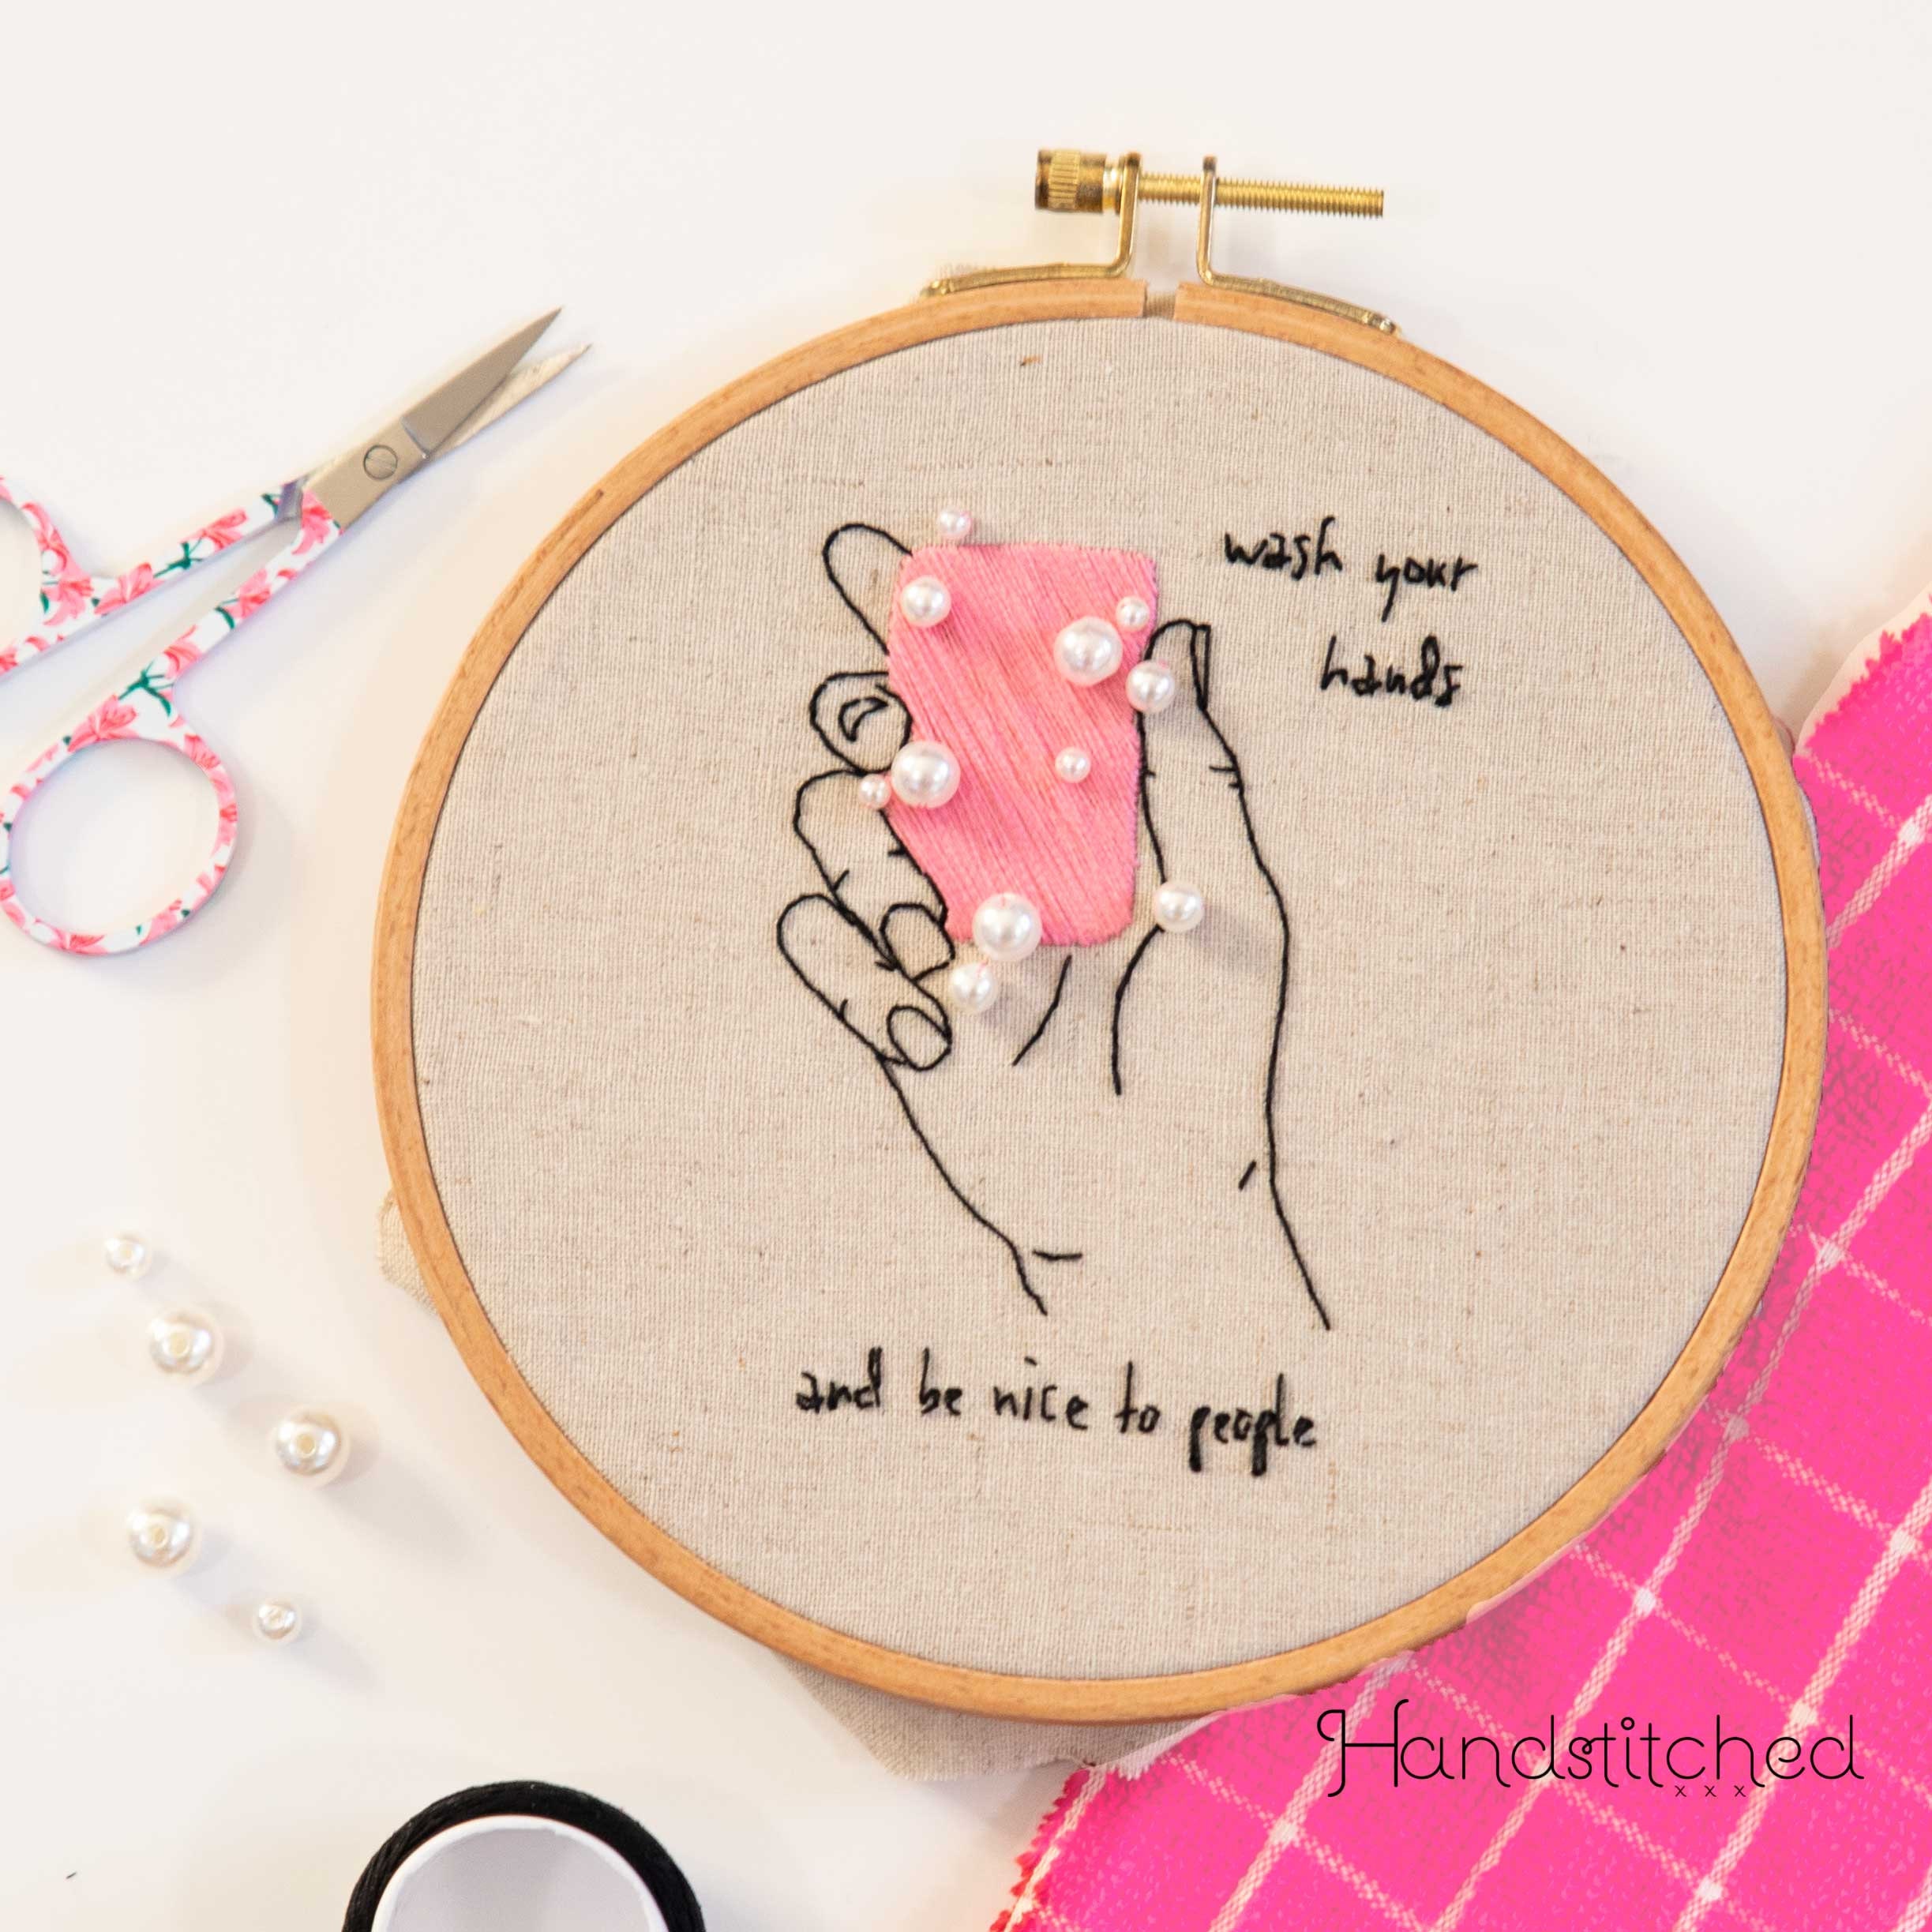 Wash Your Hands Embroidery Kit, Beginner Embroidery Kit, Wash Your